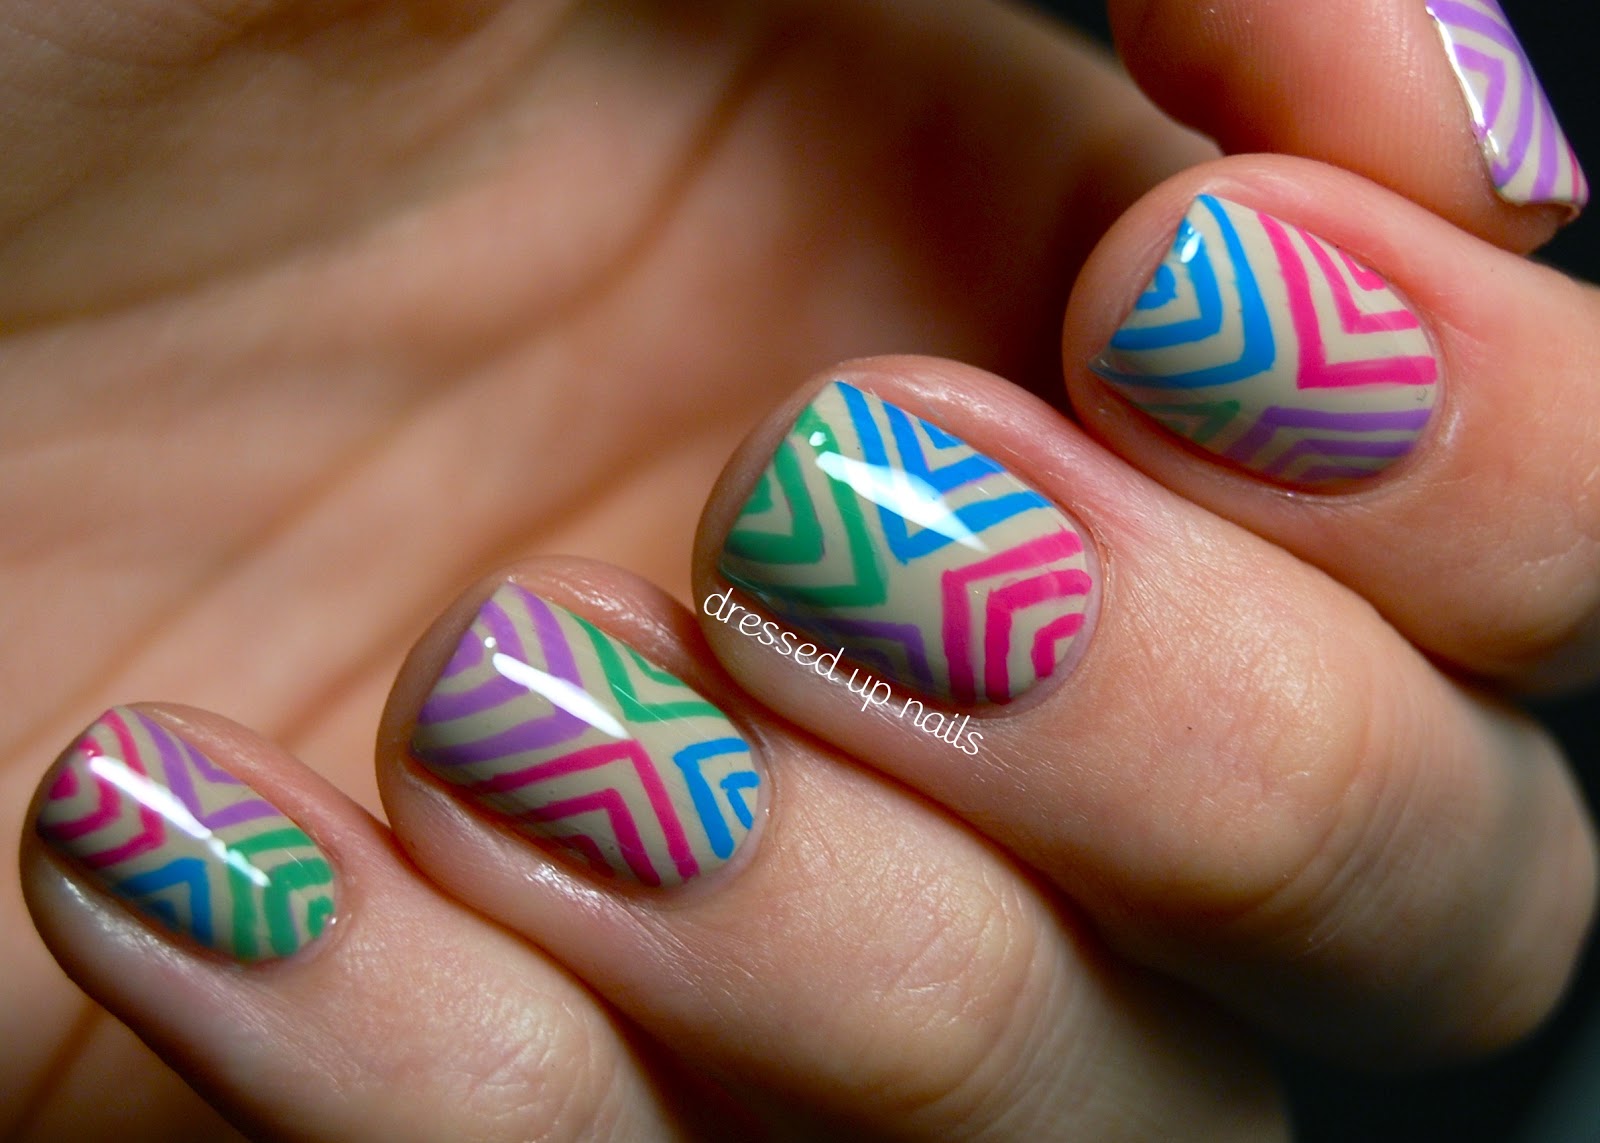 Dressed Up Nails: Colorful offset chevron nail art on a nude base 